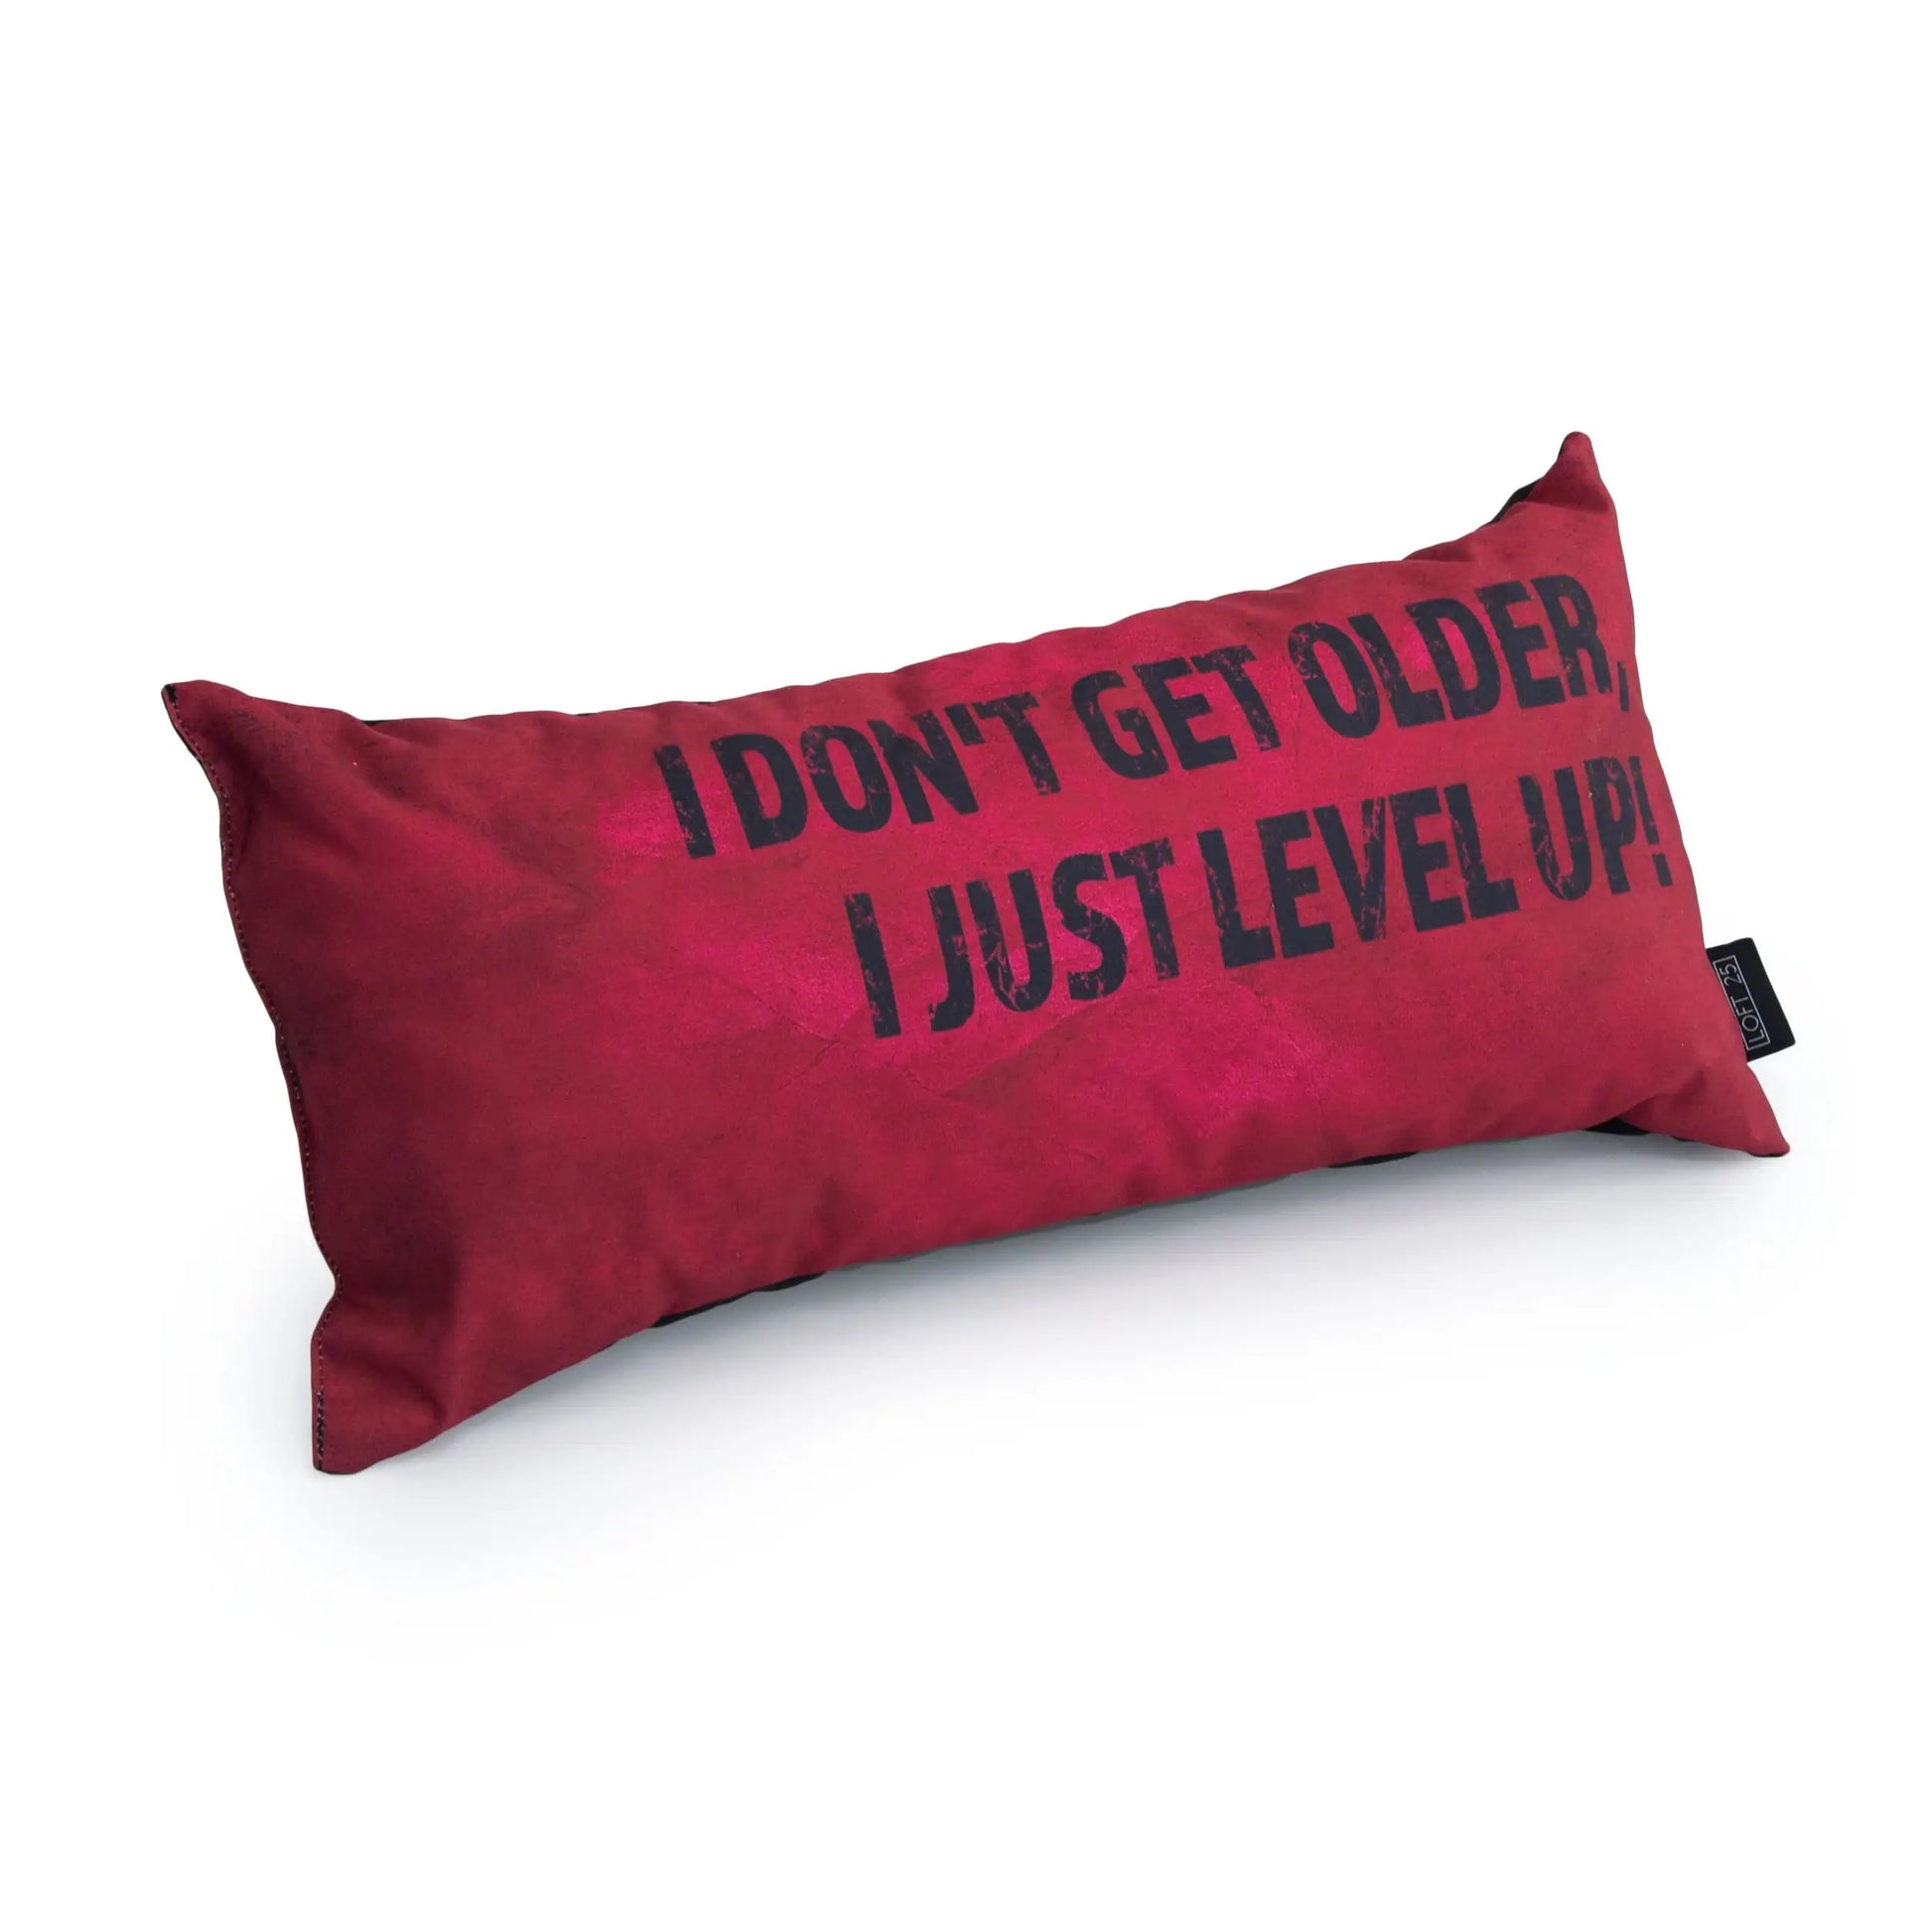 A red rectangular pillow with the text "I don't get older, I just level up."